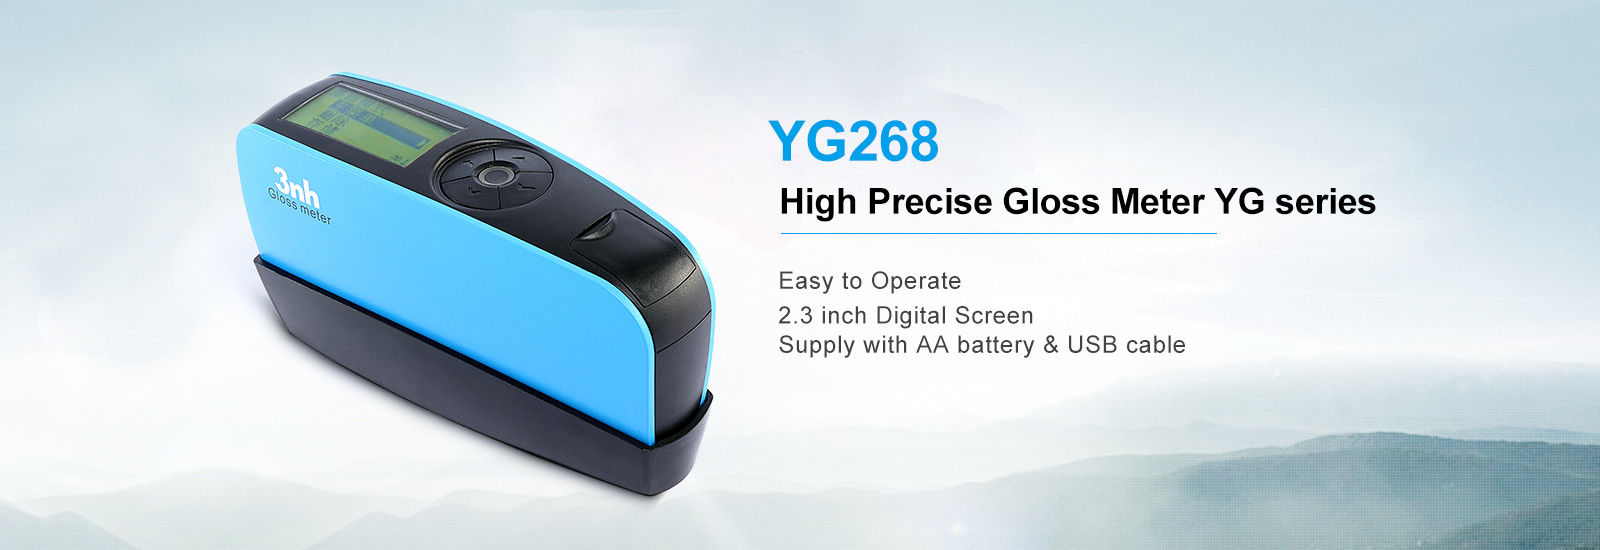 quality 3nh Spectrophotometer factory